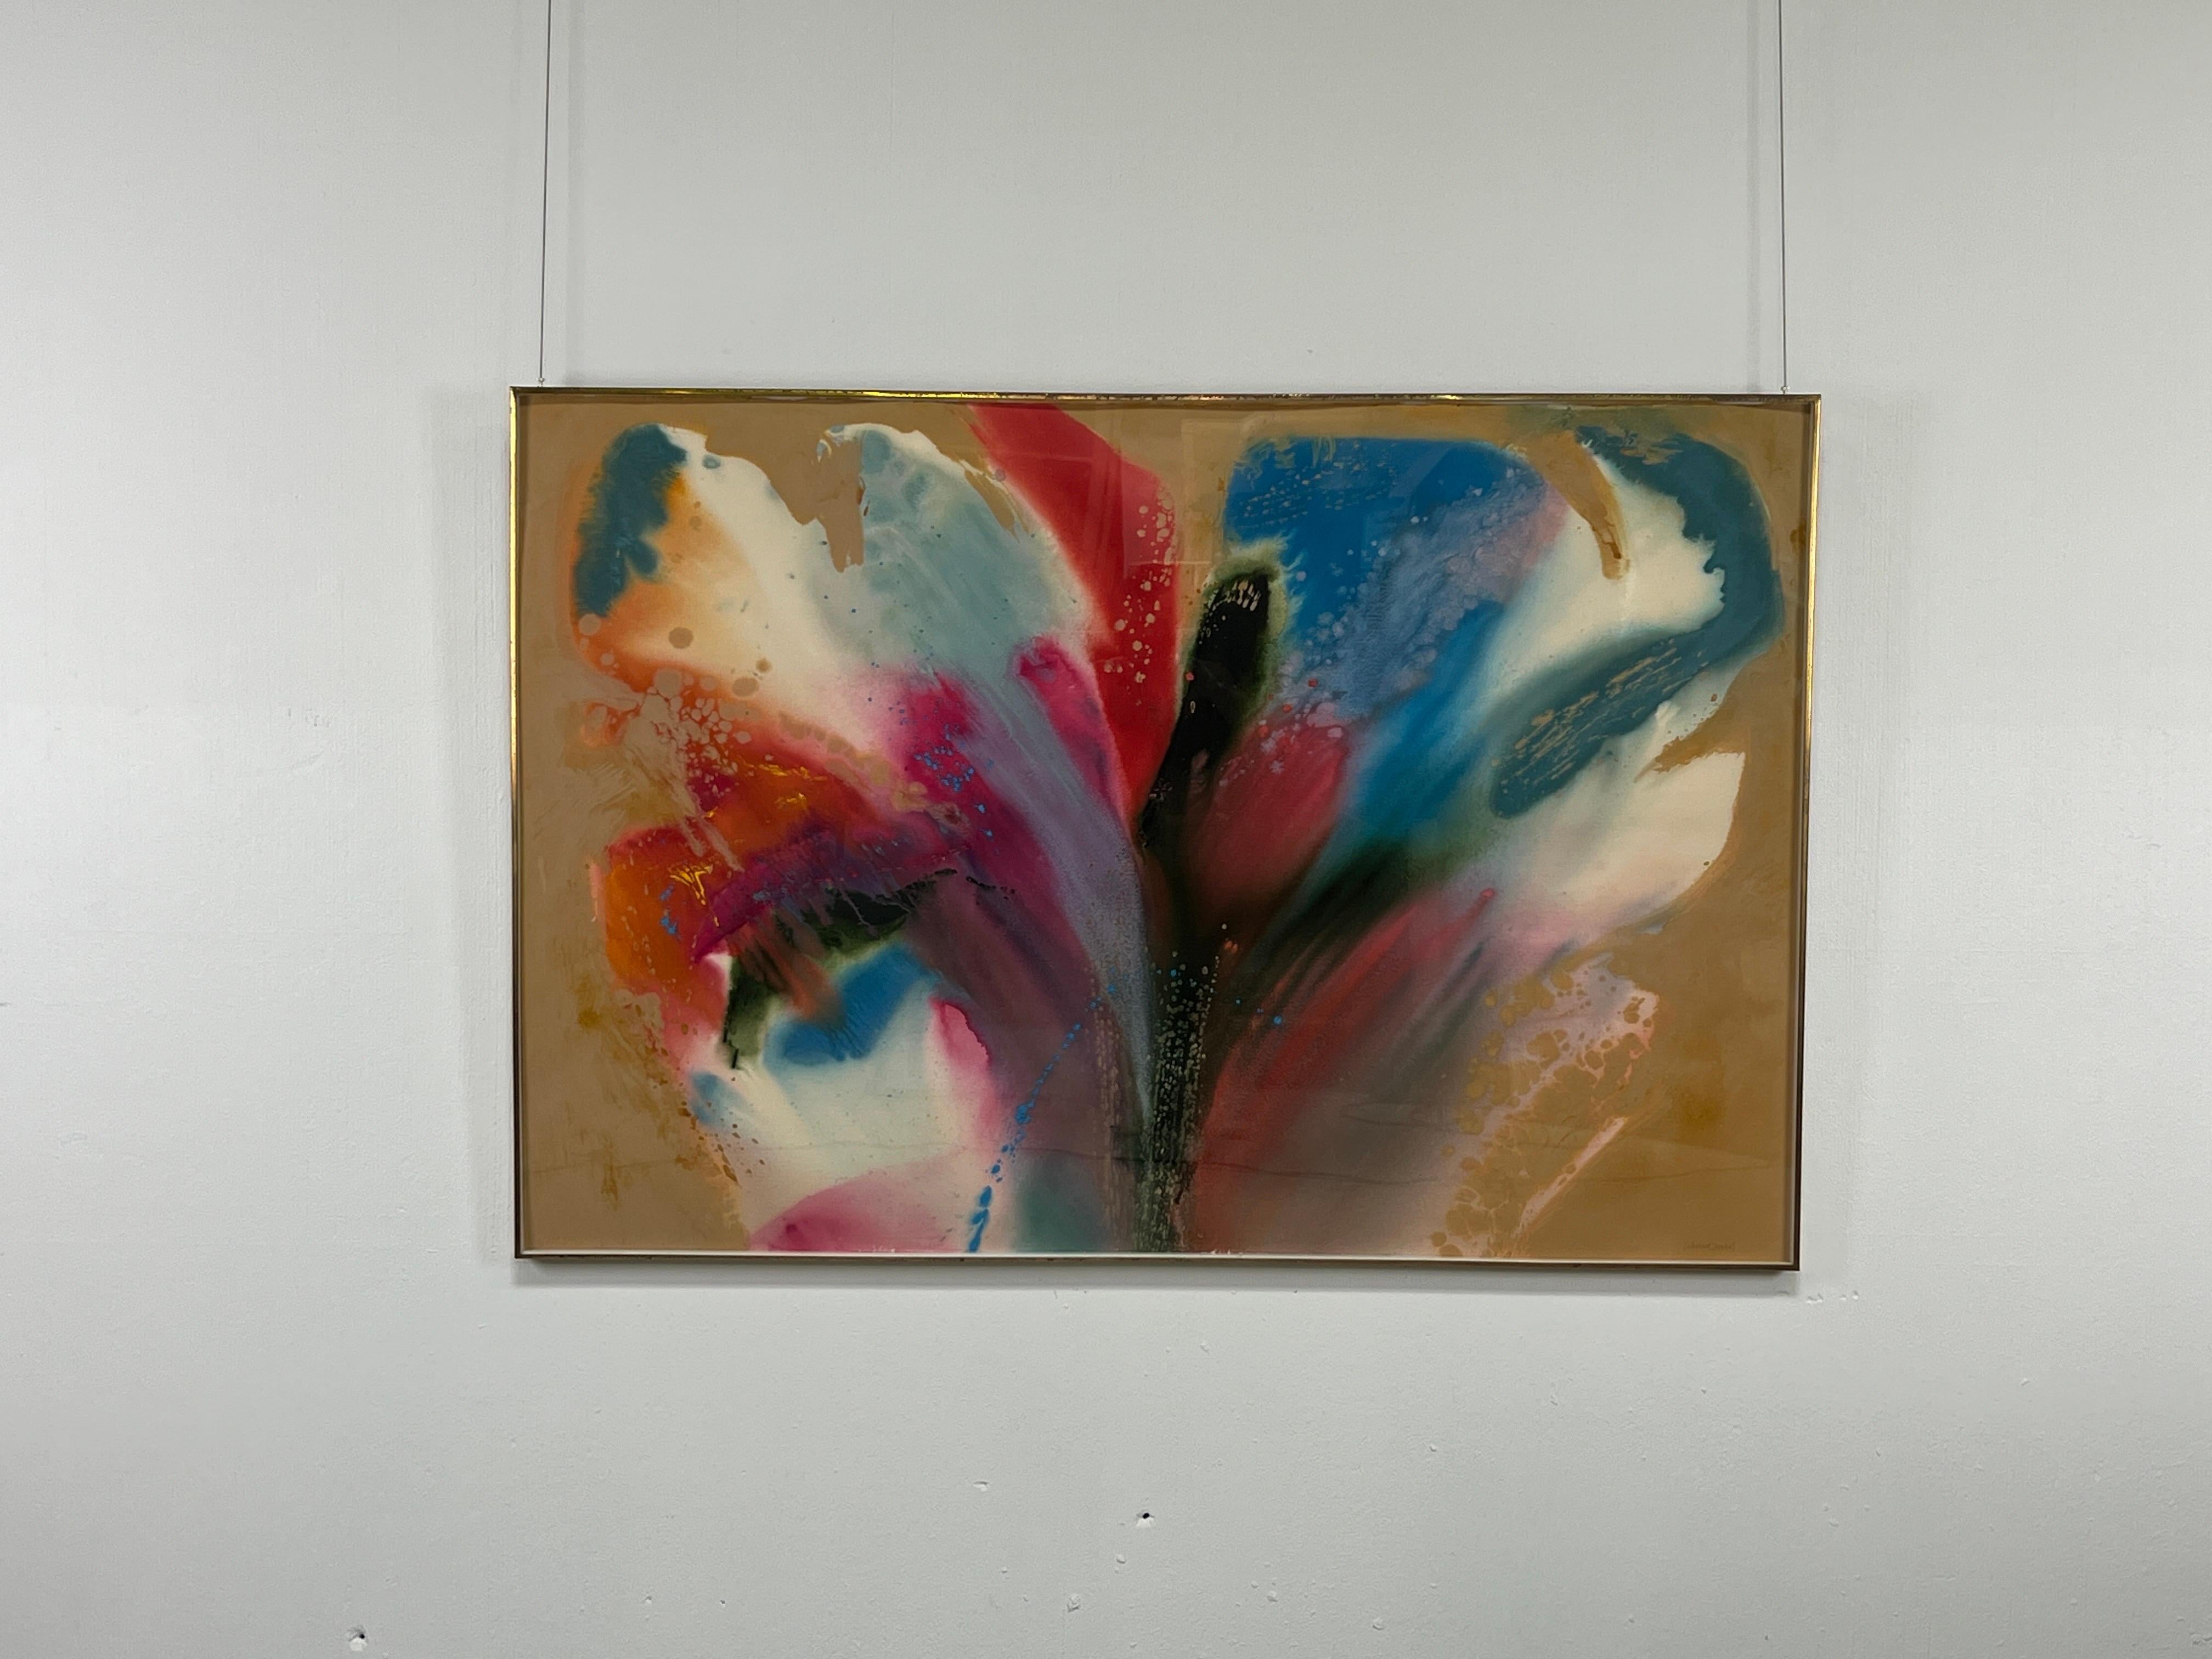 Known as an abstract colorist, Lamar Briggs (American, 1935-2015) began experimenting with acrylic paints in the early 1970's. In this undated work on paper he's thinned his medium down almost to the point of transparency, creating a free-flowing